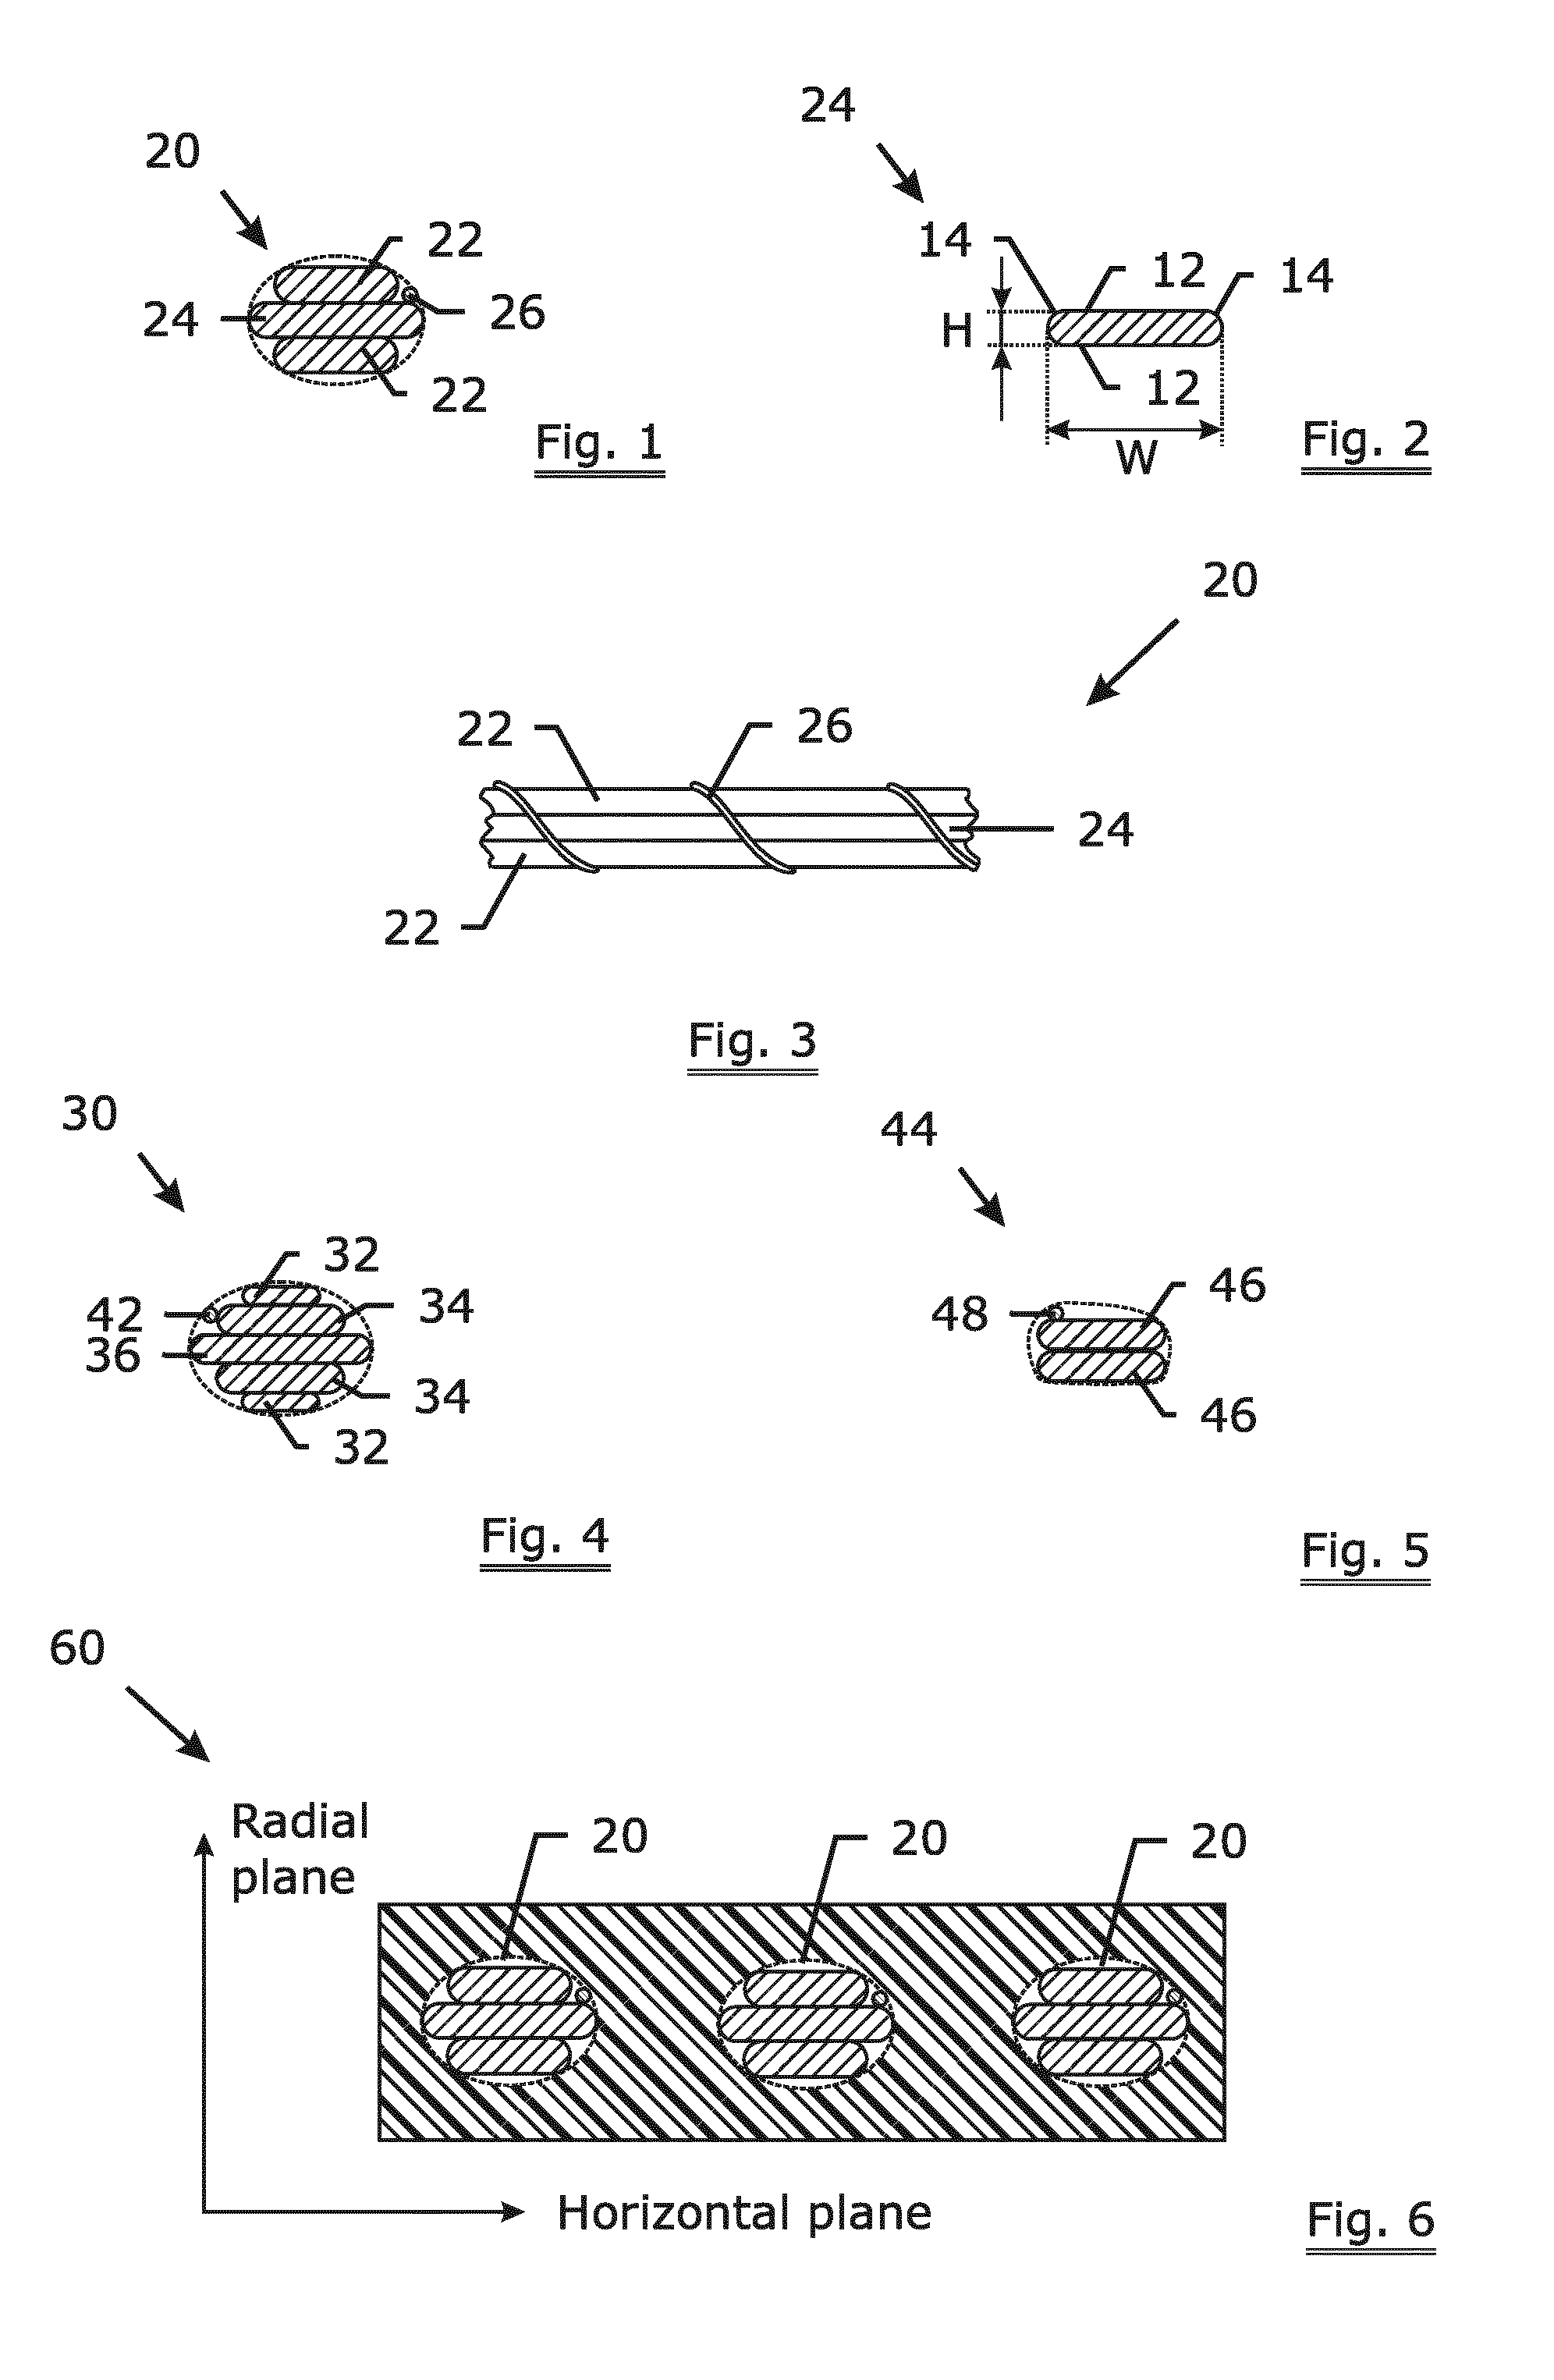 Steel cord comprising flat wires